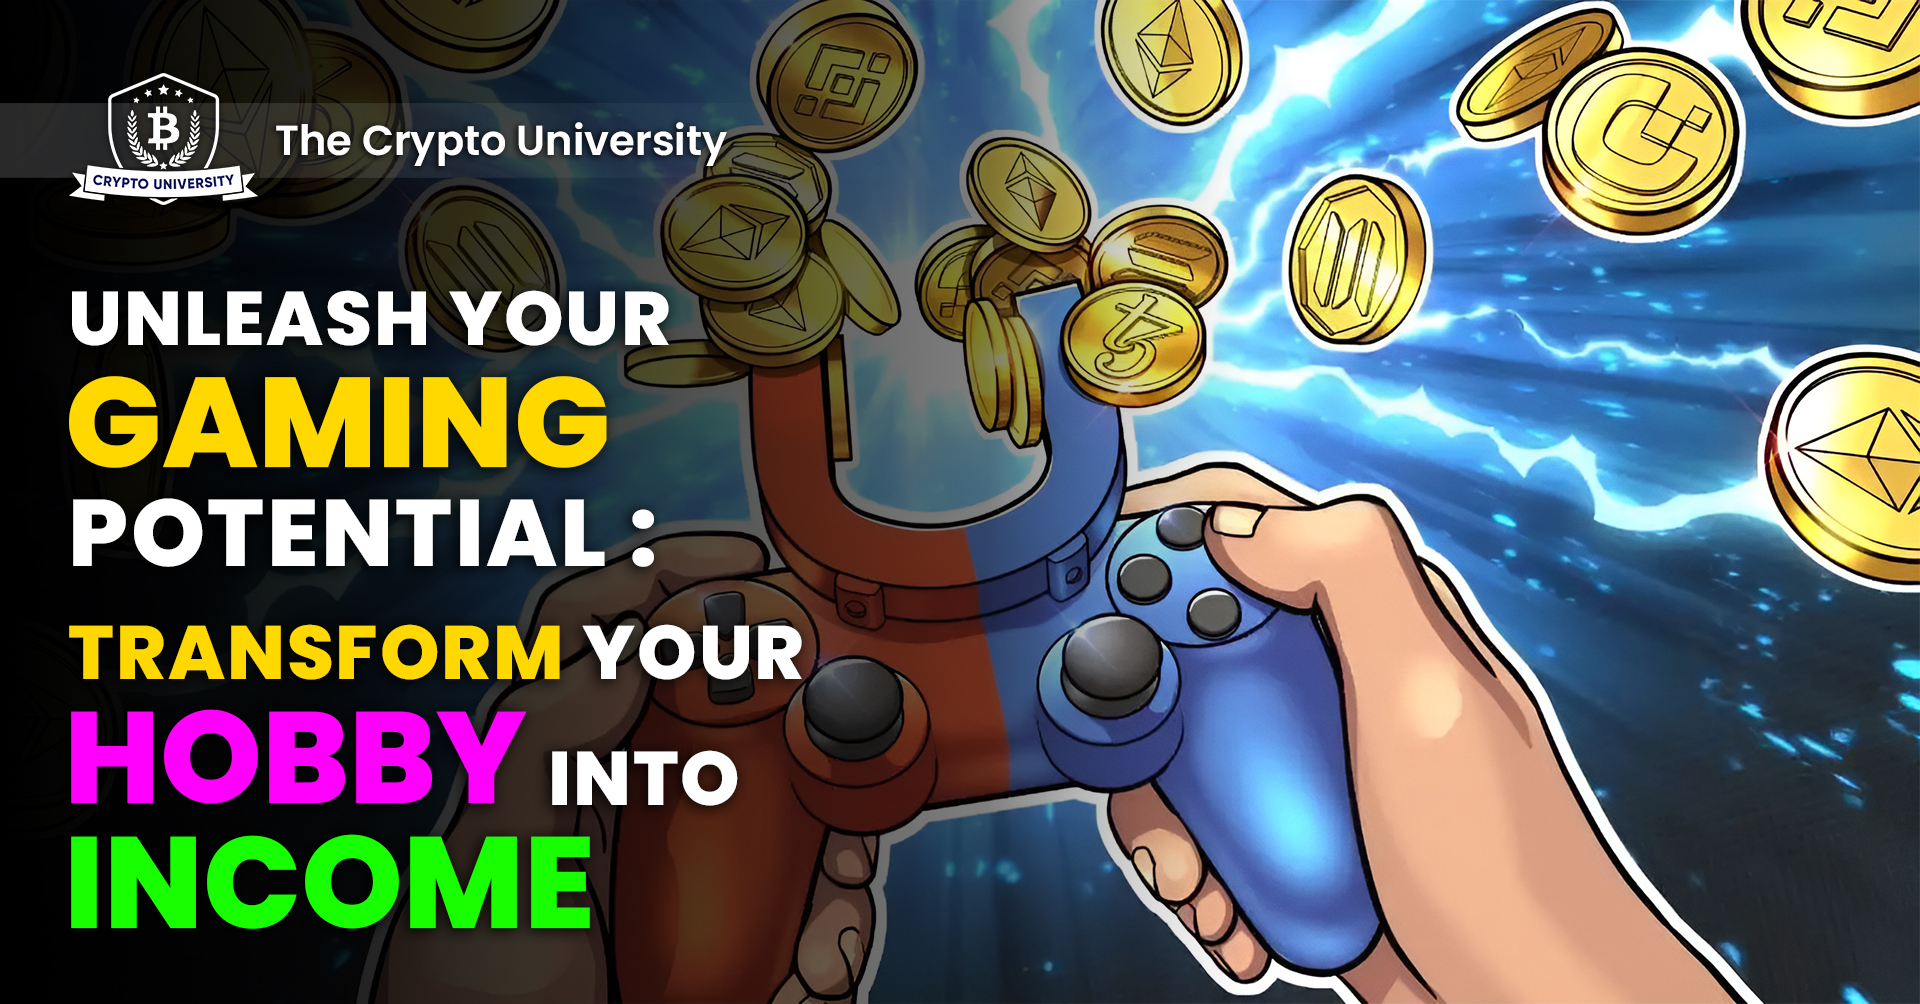 A hand holding a pad, playing crypto games, and earning money.